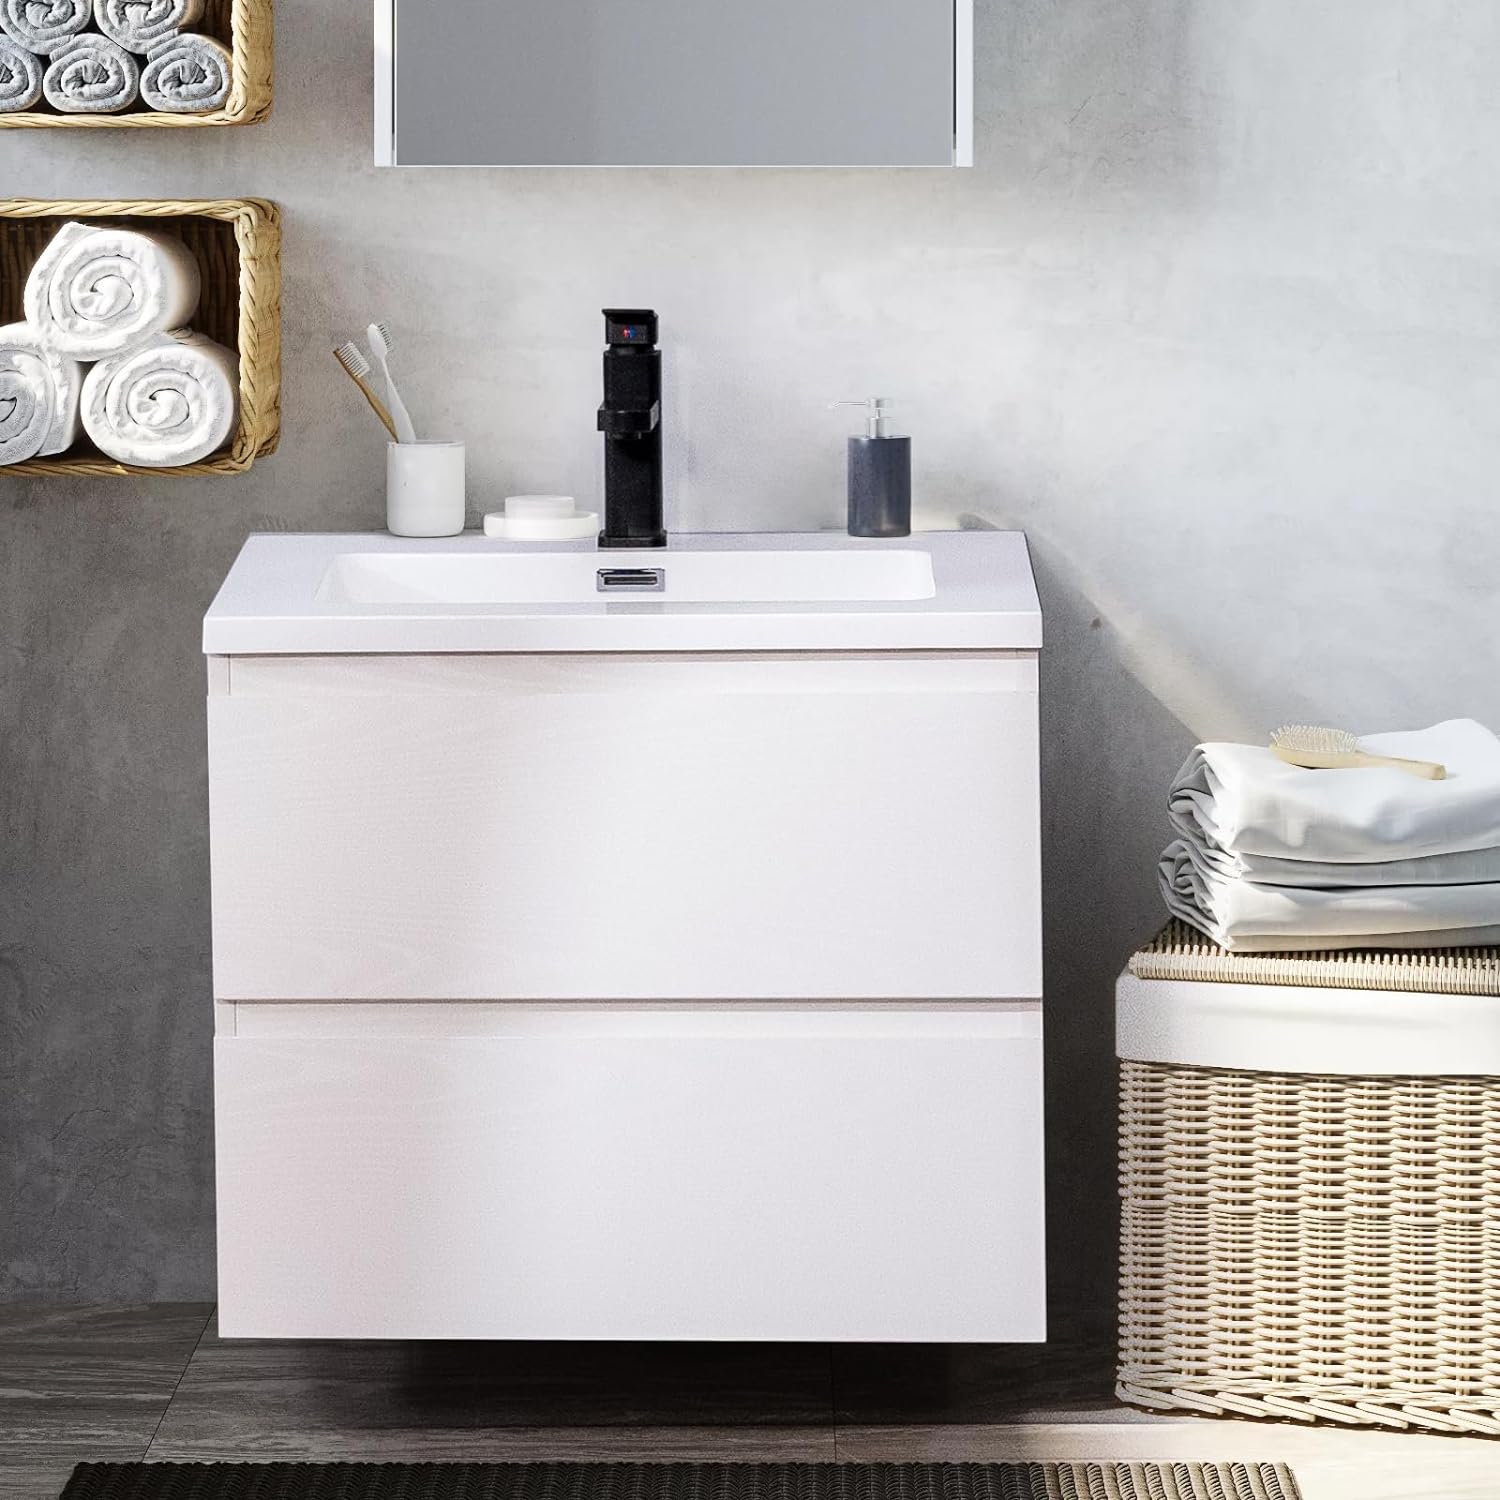 24 White Wall Mounted Bathroom Vanity with Sink Floating Vanity Two Drawers Bathroom Cabinet with White Ceramic Integrated Sink